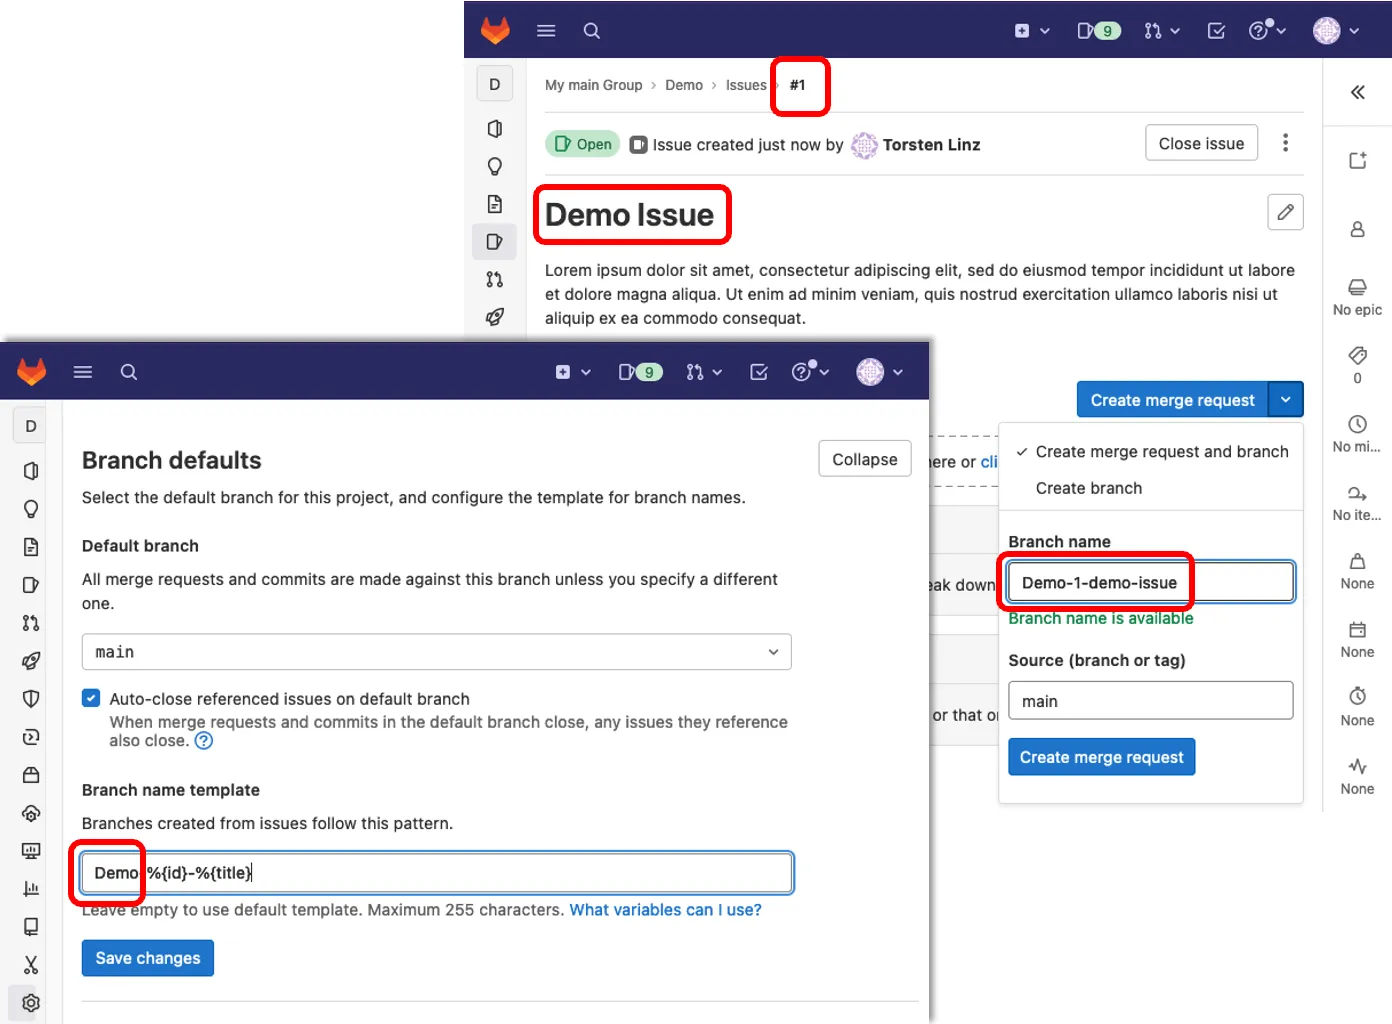 https://about.gitlab.com/images/15_6/configure_default_names_for_branches_created_from_issues.png -- Configure default names for branches created from issues